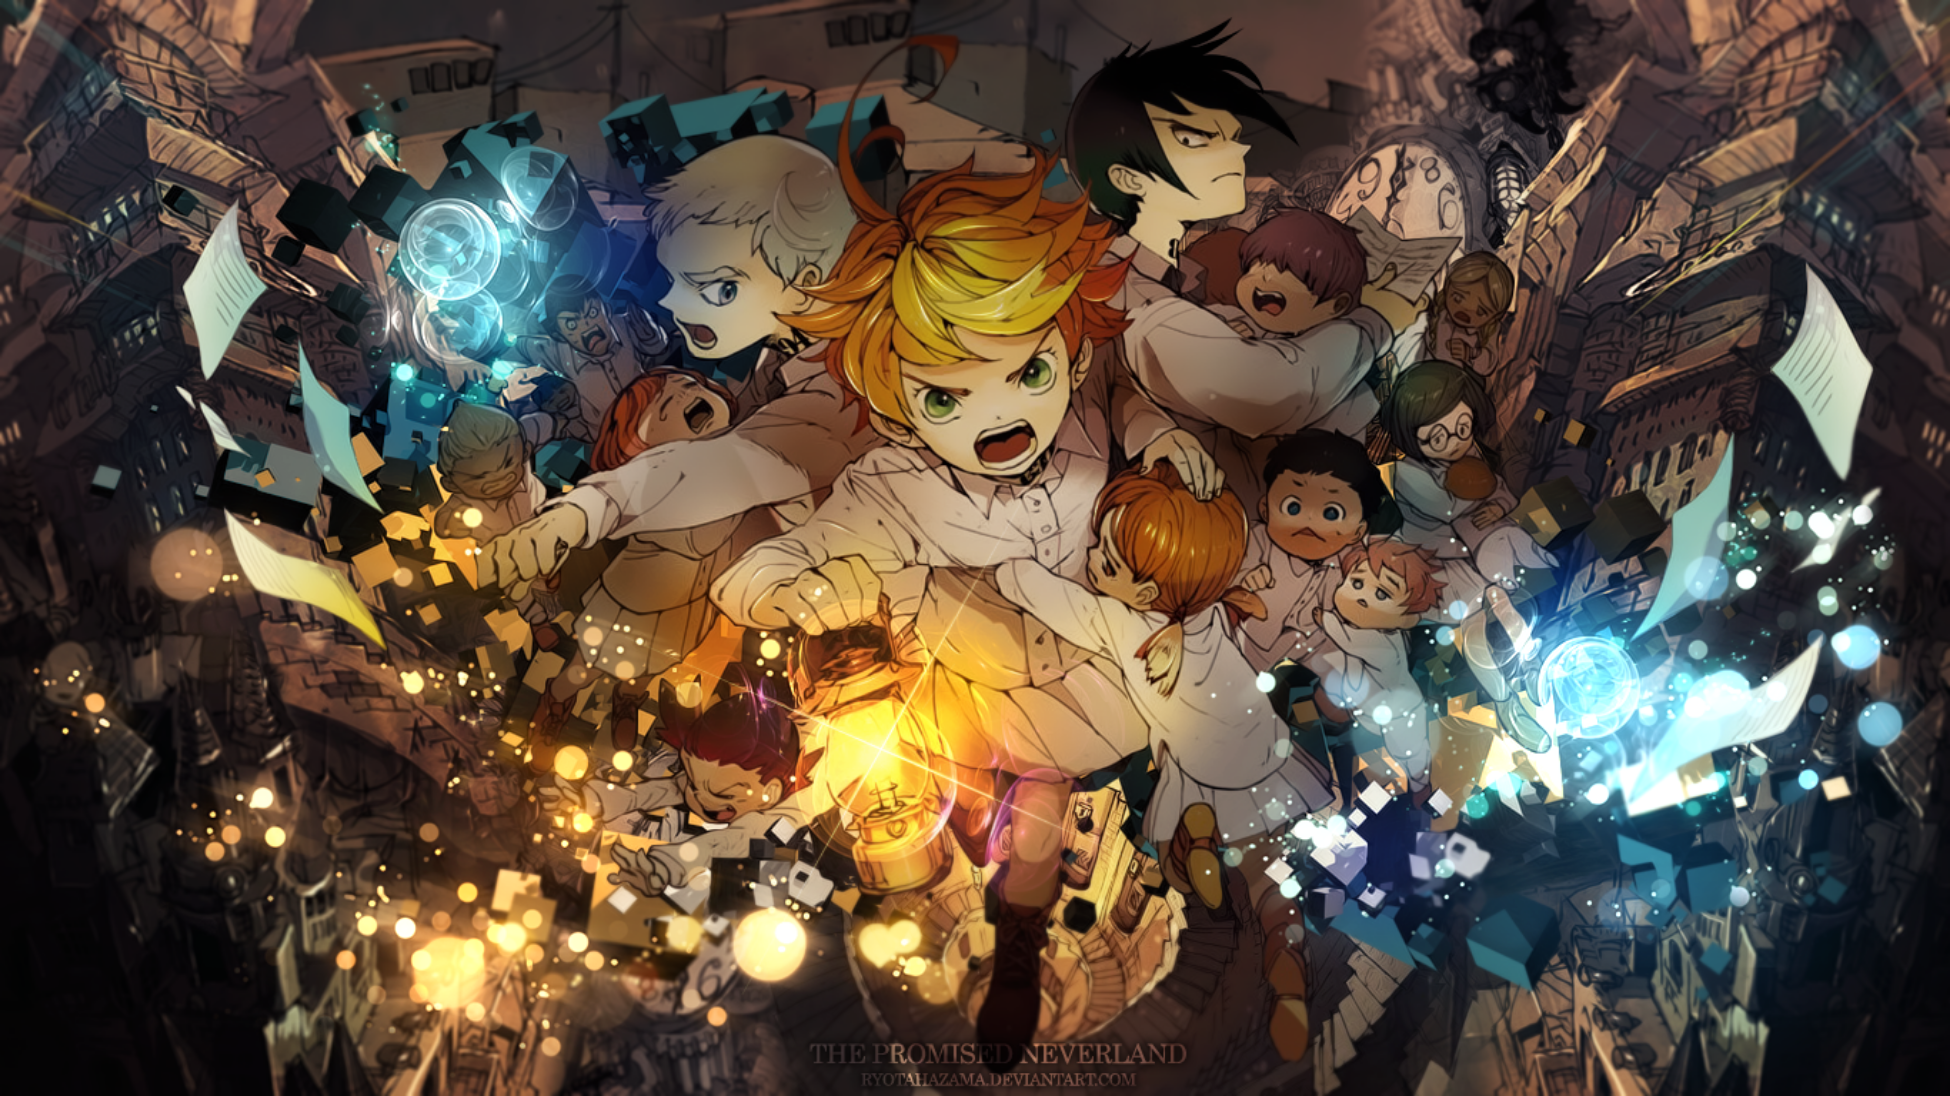 The Promised Neverland HD Wallpaper Background Image